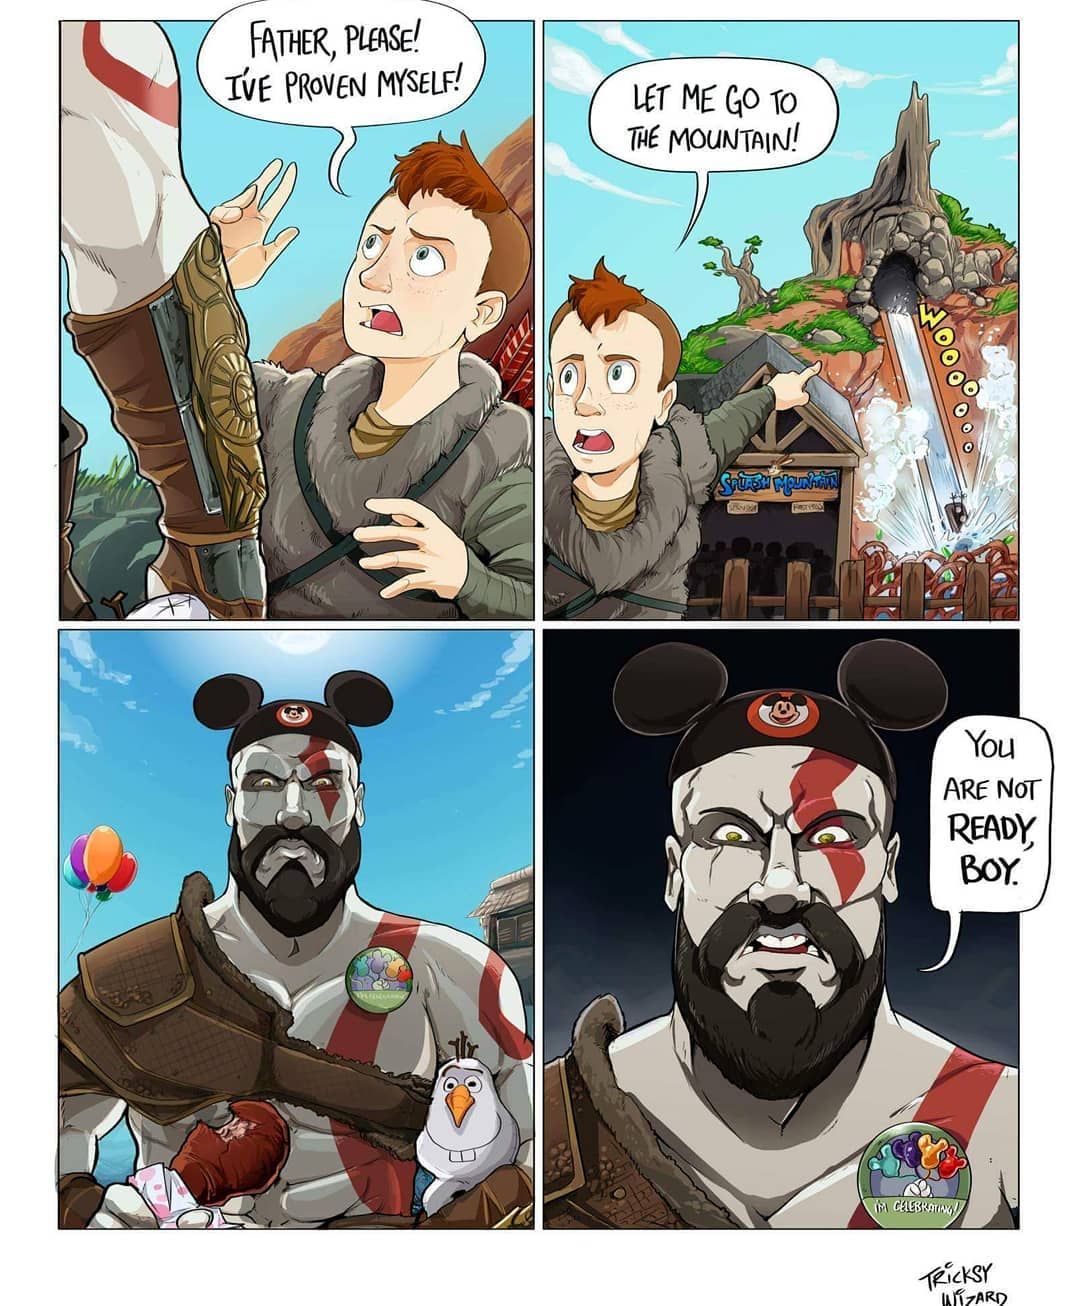 25 God Of War PS4 Memes That Are Too Hilarious For Words